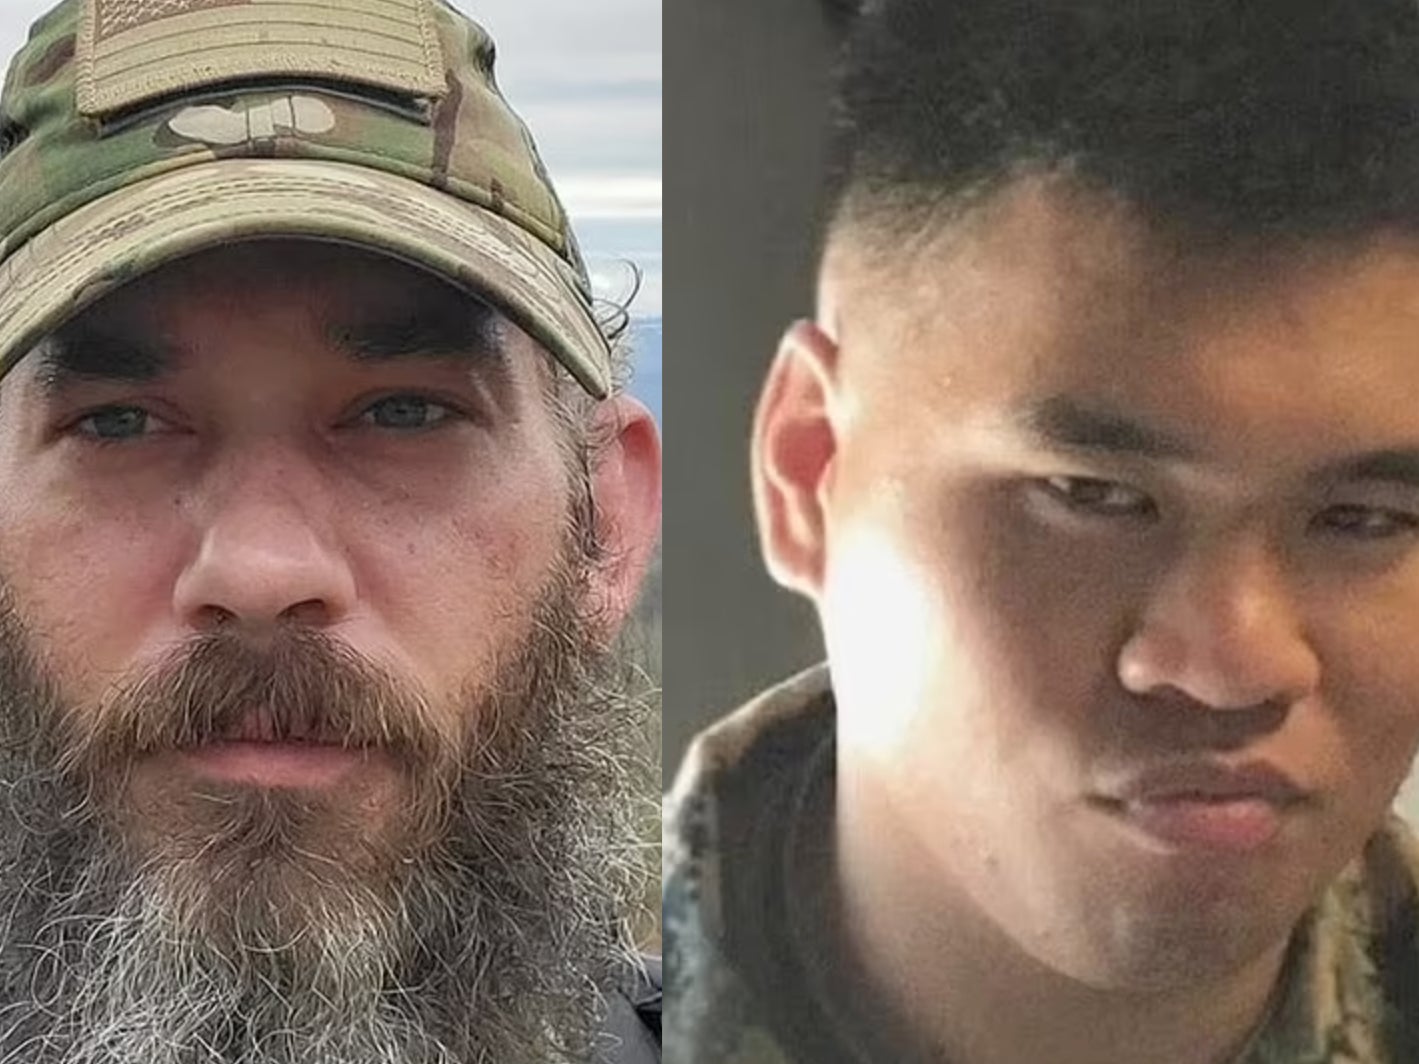 Robert Drueke, 39, (left) and Andy Huynh, 27 (right), were reportedly captured by Russian forces following a battle in Kharkiv, according to Russian military claims. The men are the first Americans fighting with Ukraine to be captured during the war.